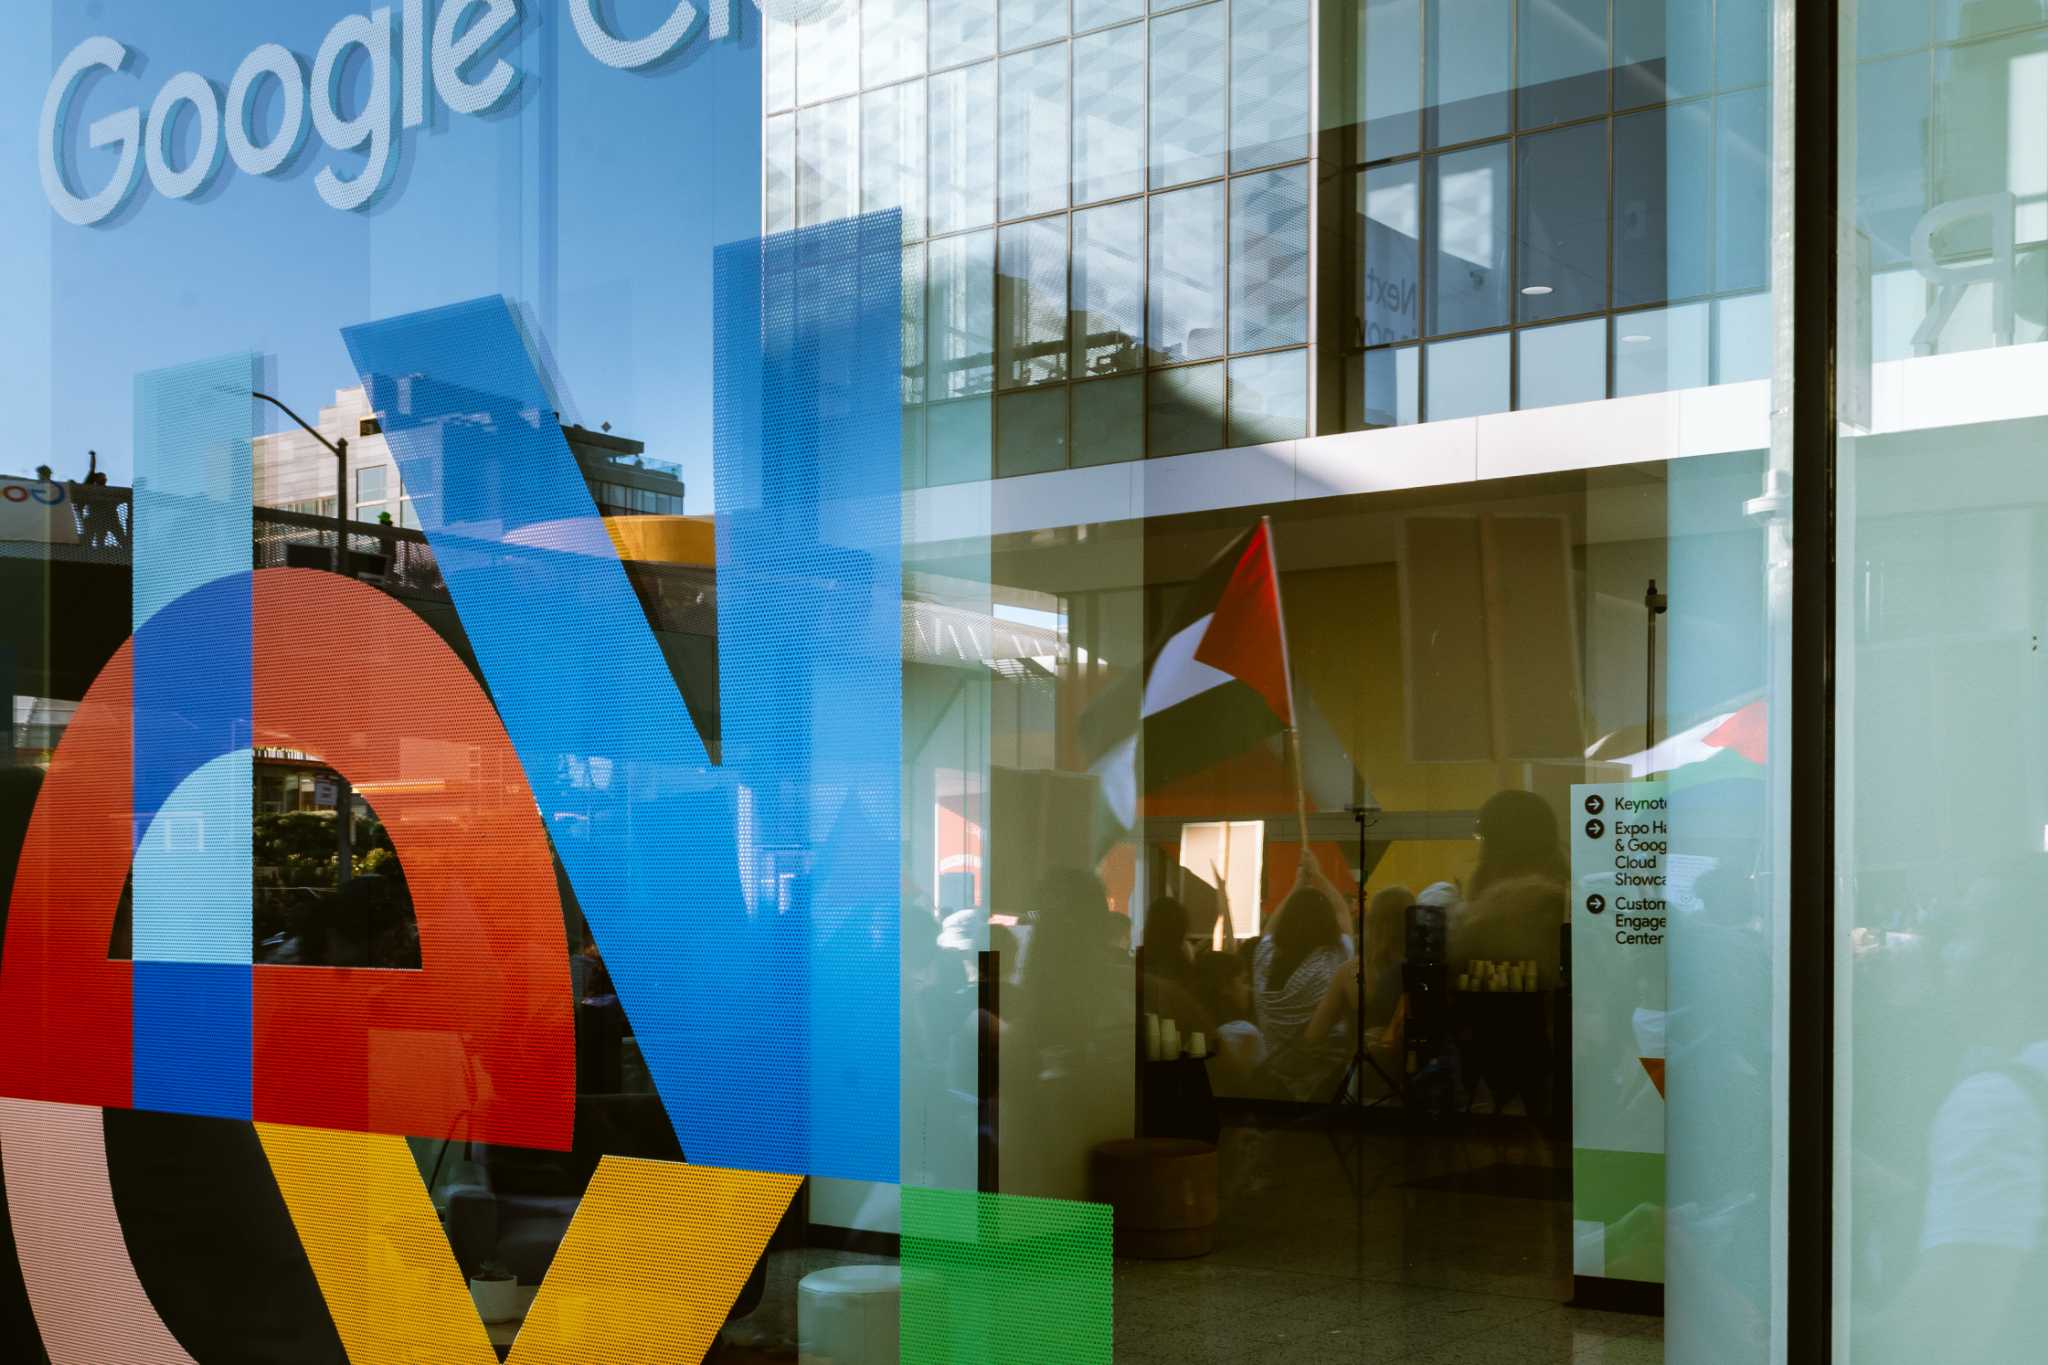 San Francisco is losing the Google Cloud Next tech conference